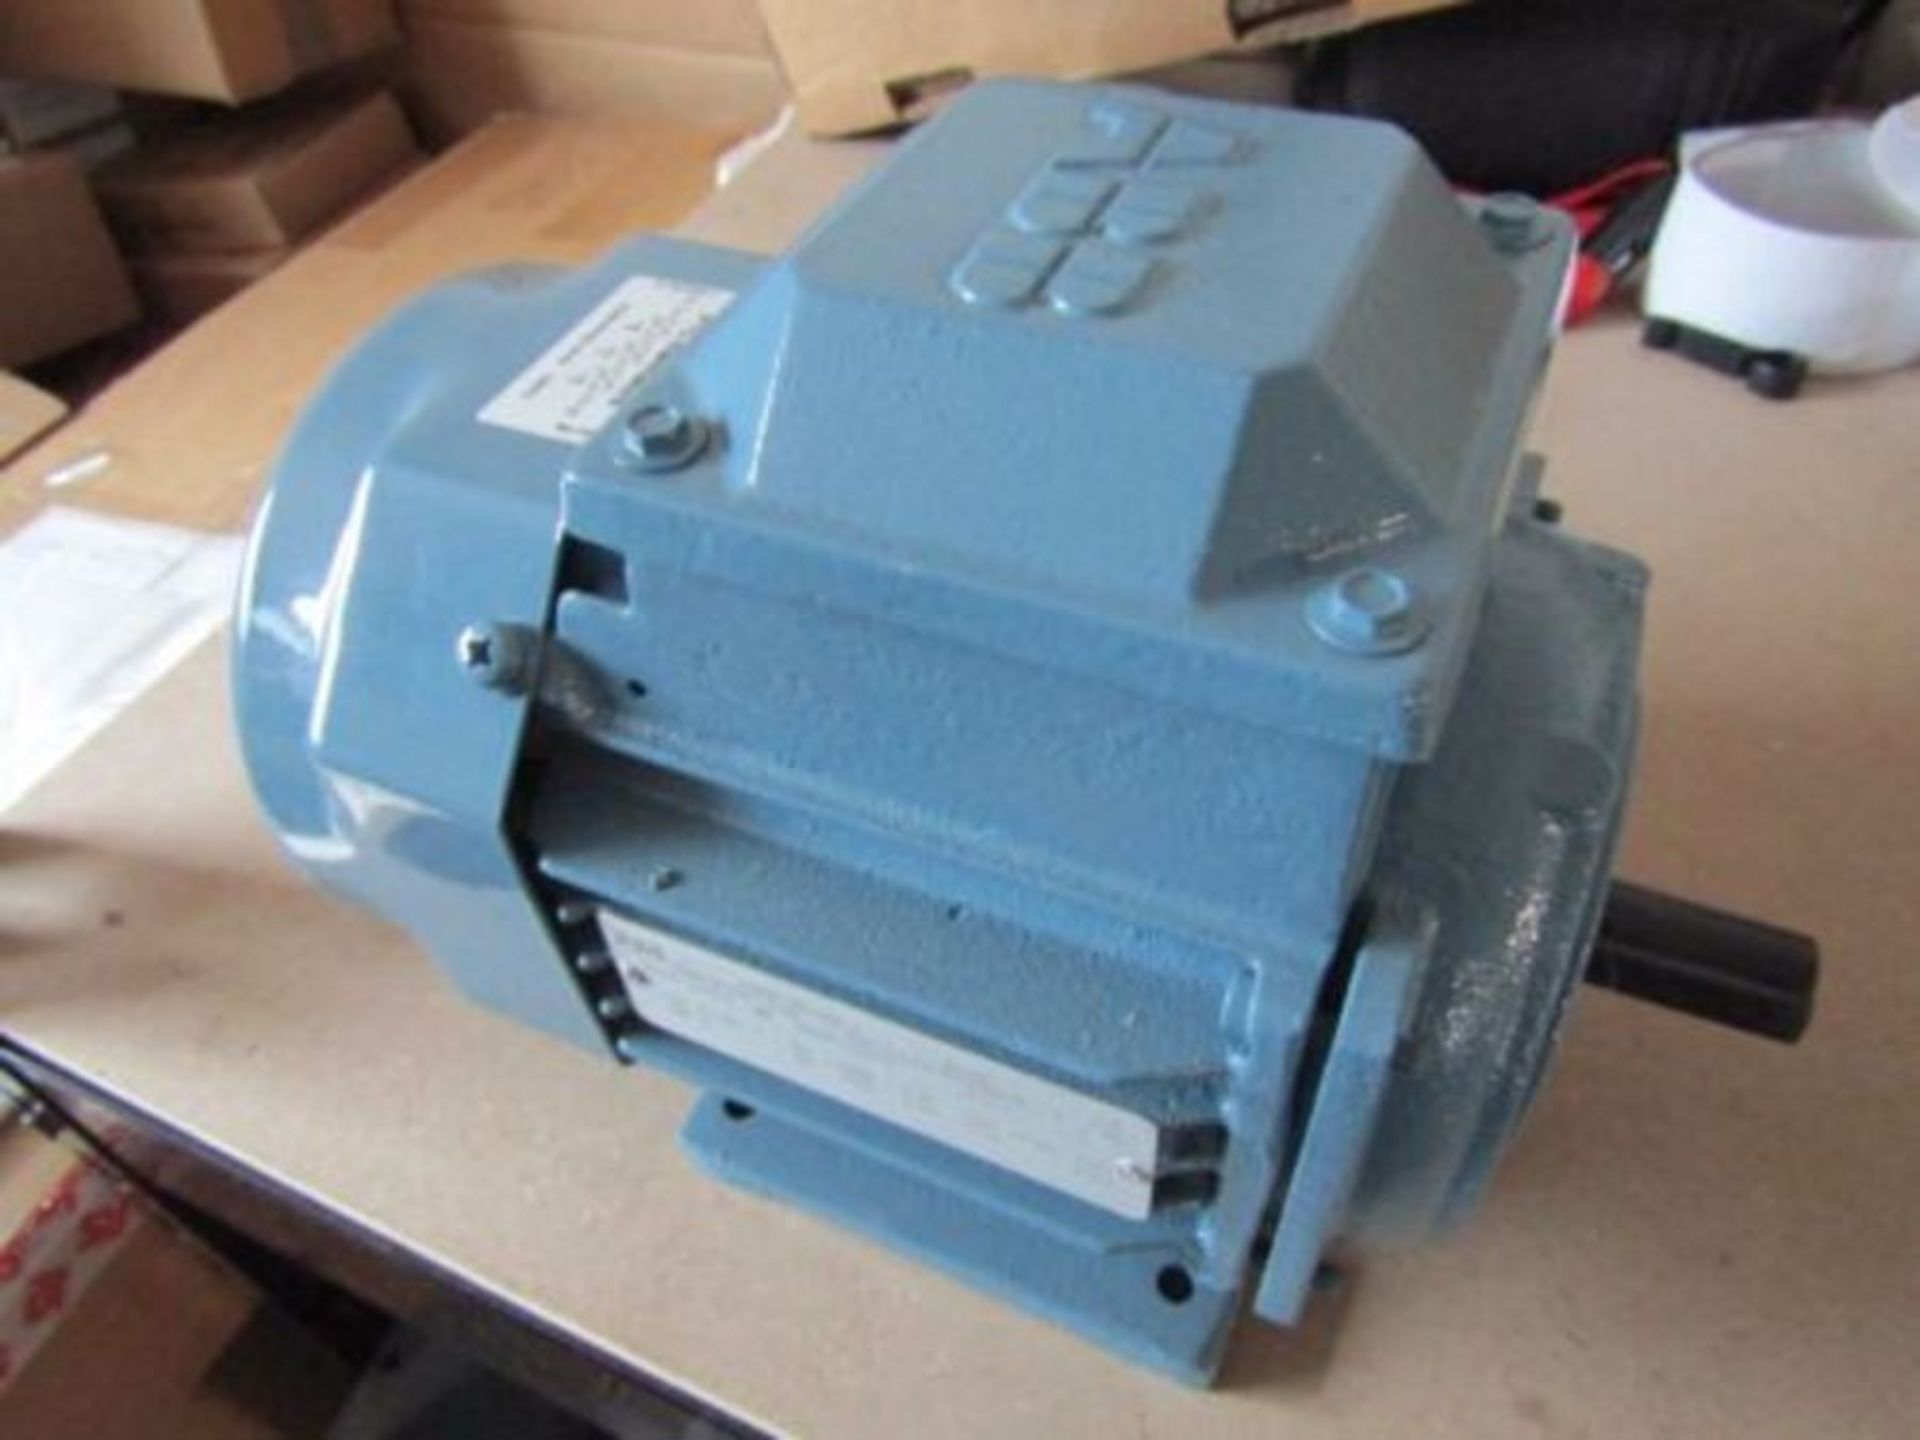 5 x ABB 3ph 2P induction motors - £900 cost price in total - Image 2 of 2